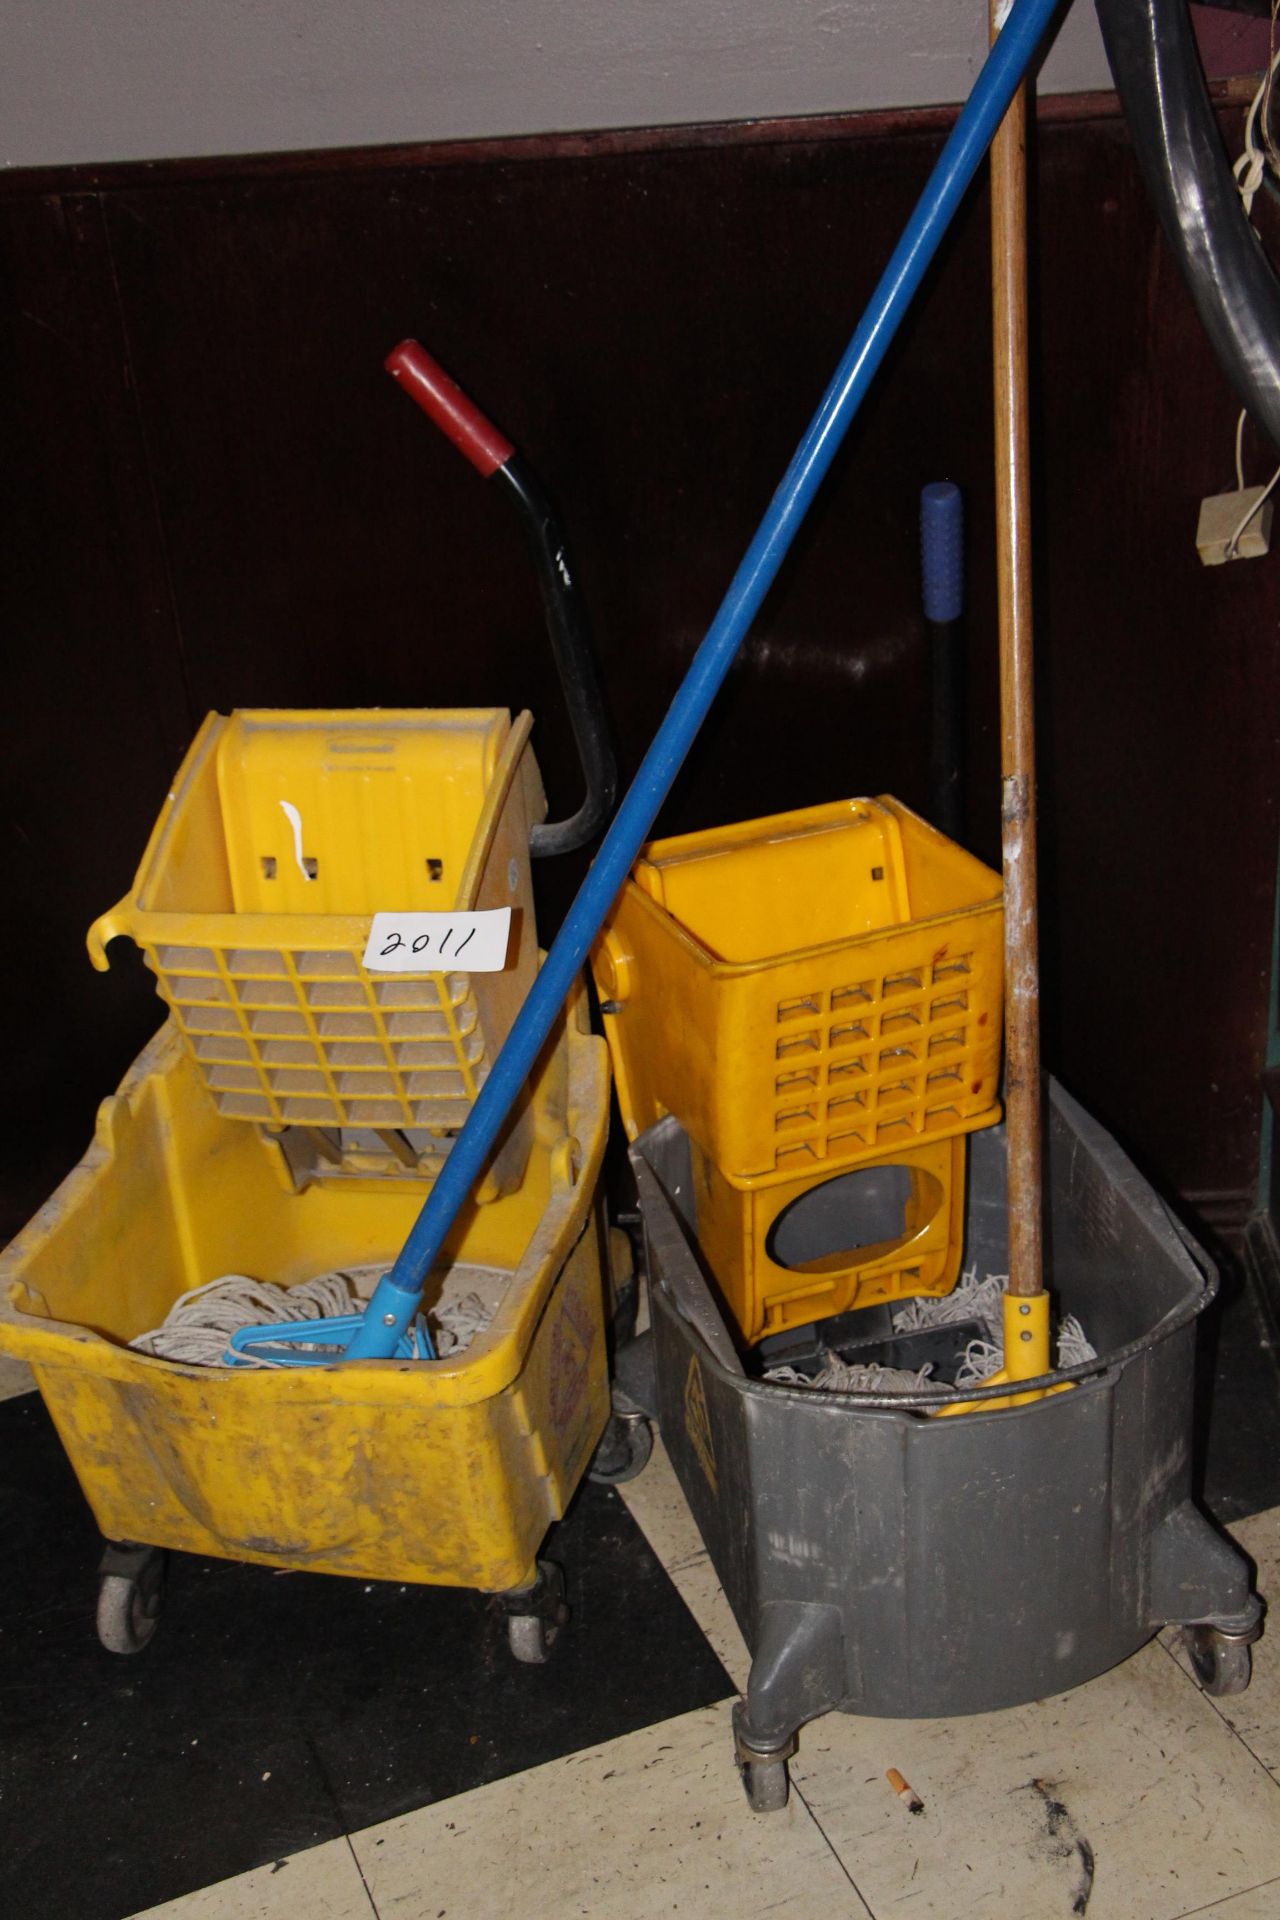 Lot 2 mop and buckets